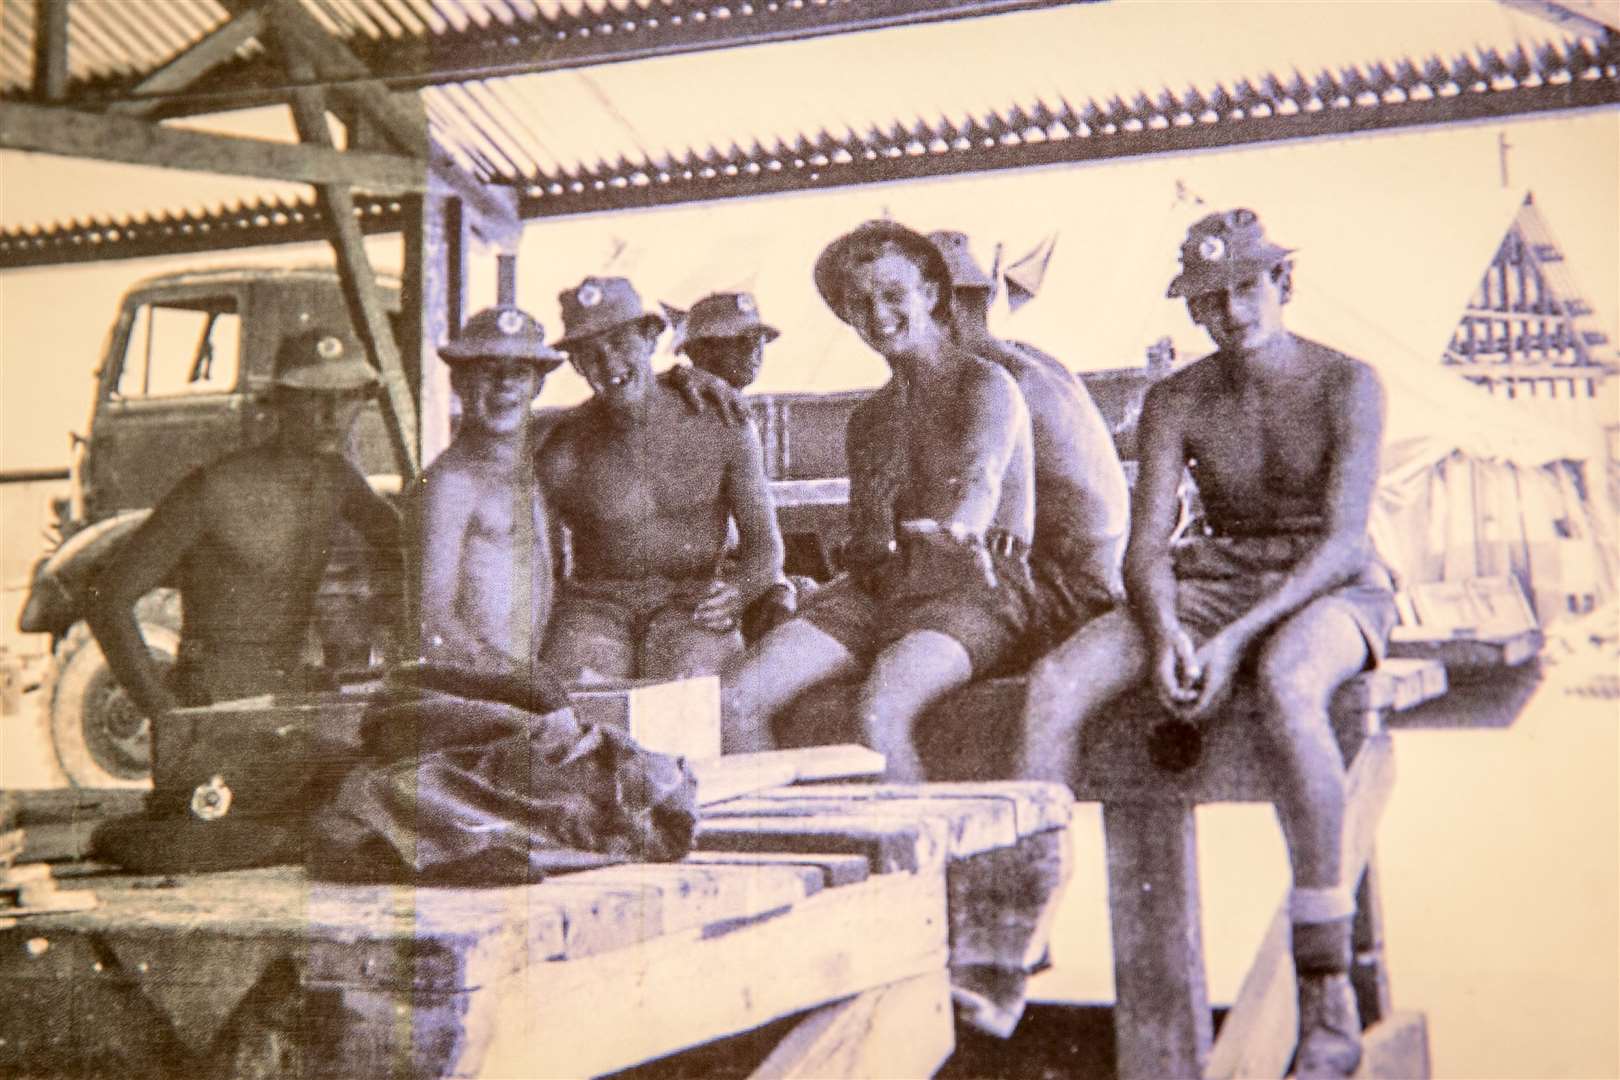 Terry Quinlan, second from left, on Christmas Island